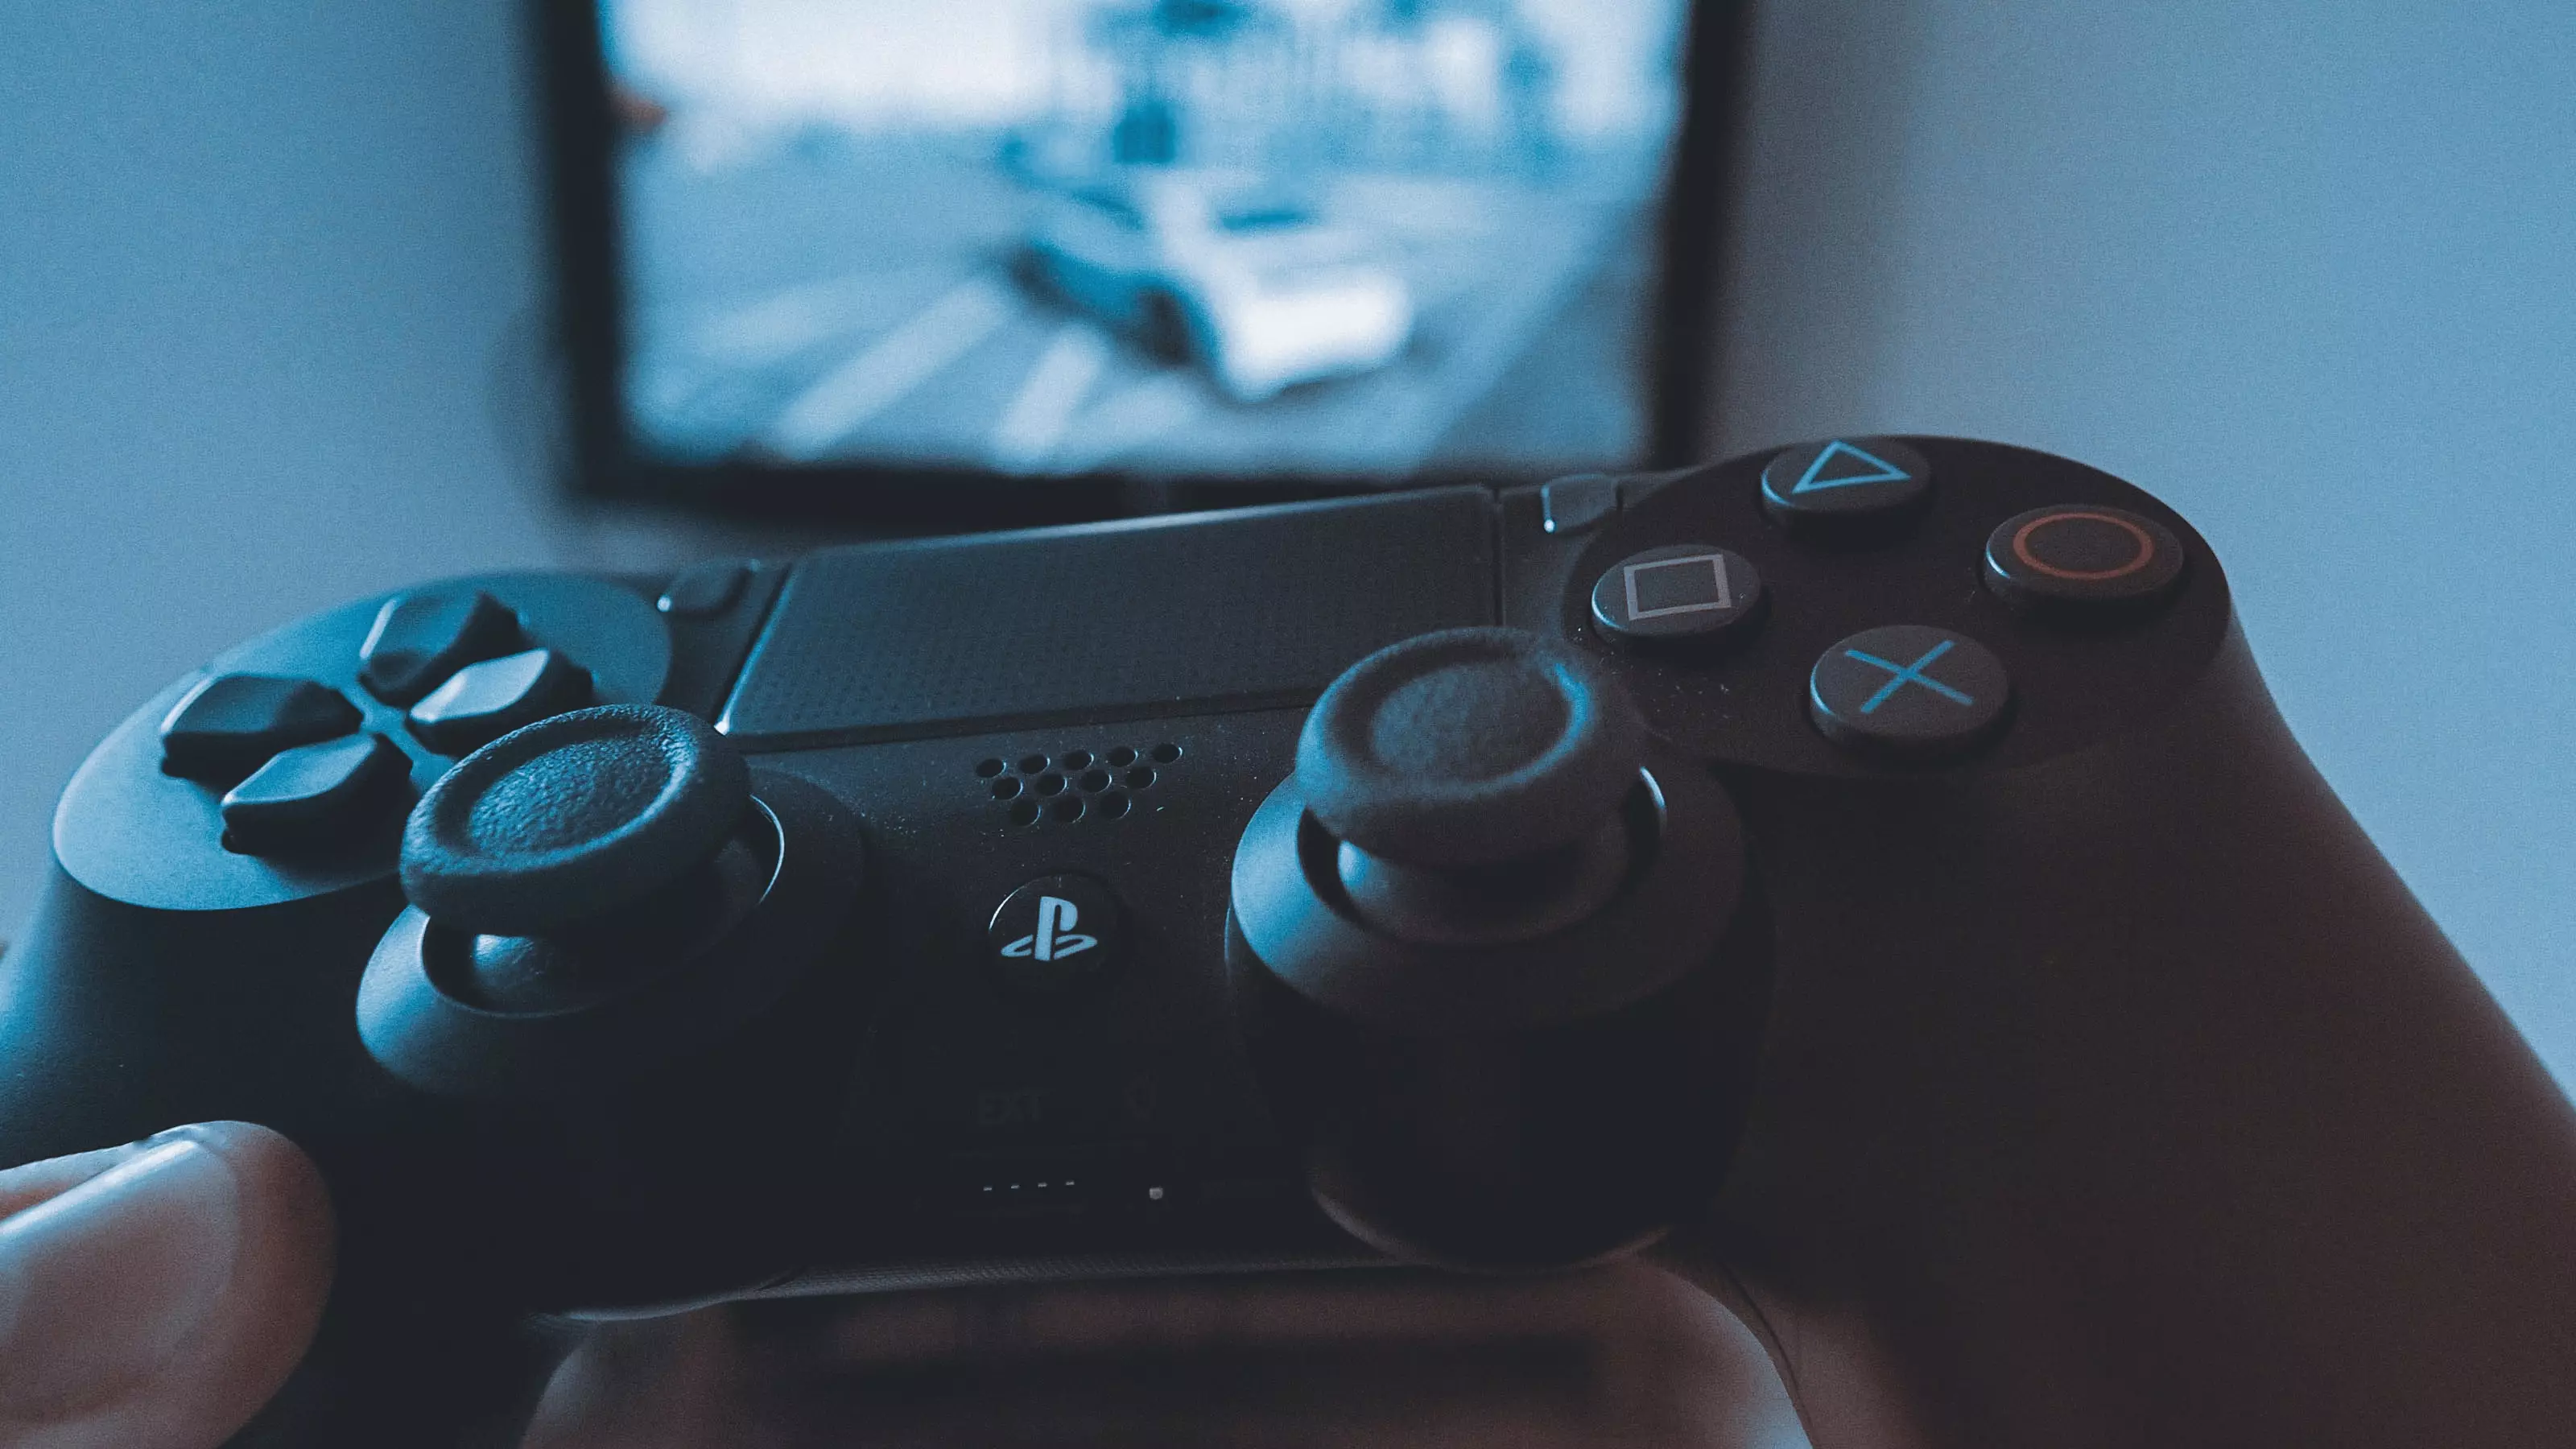 You'll be able to play your PS4 games on PlayStation 5.